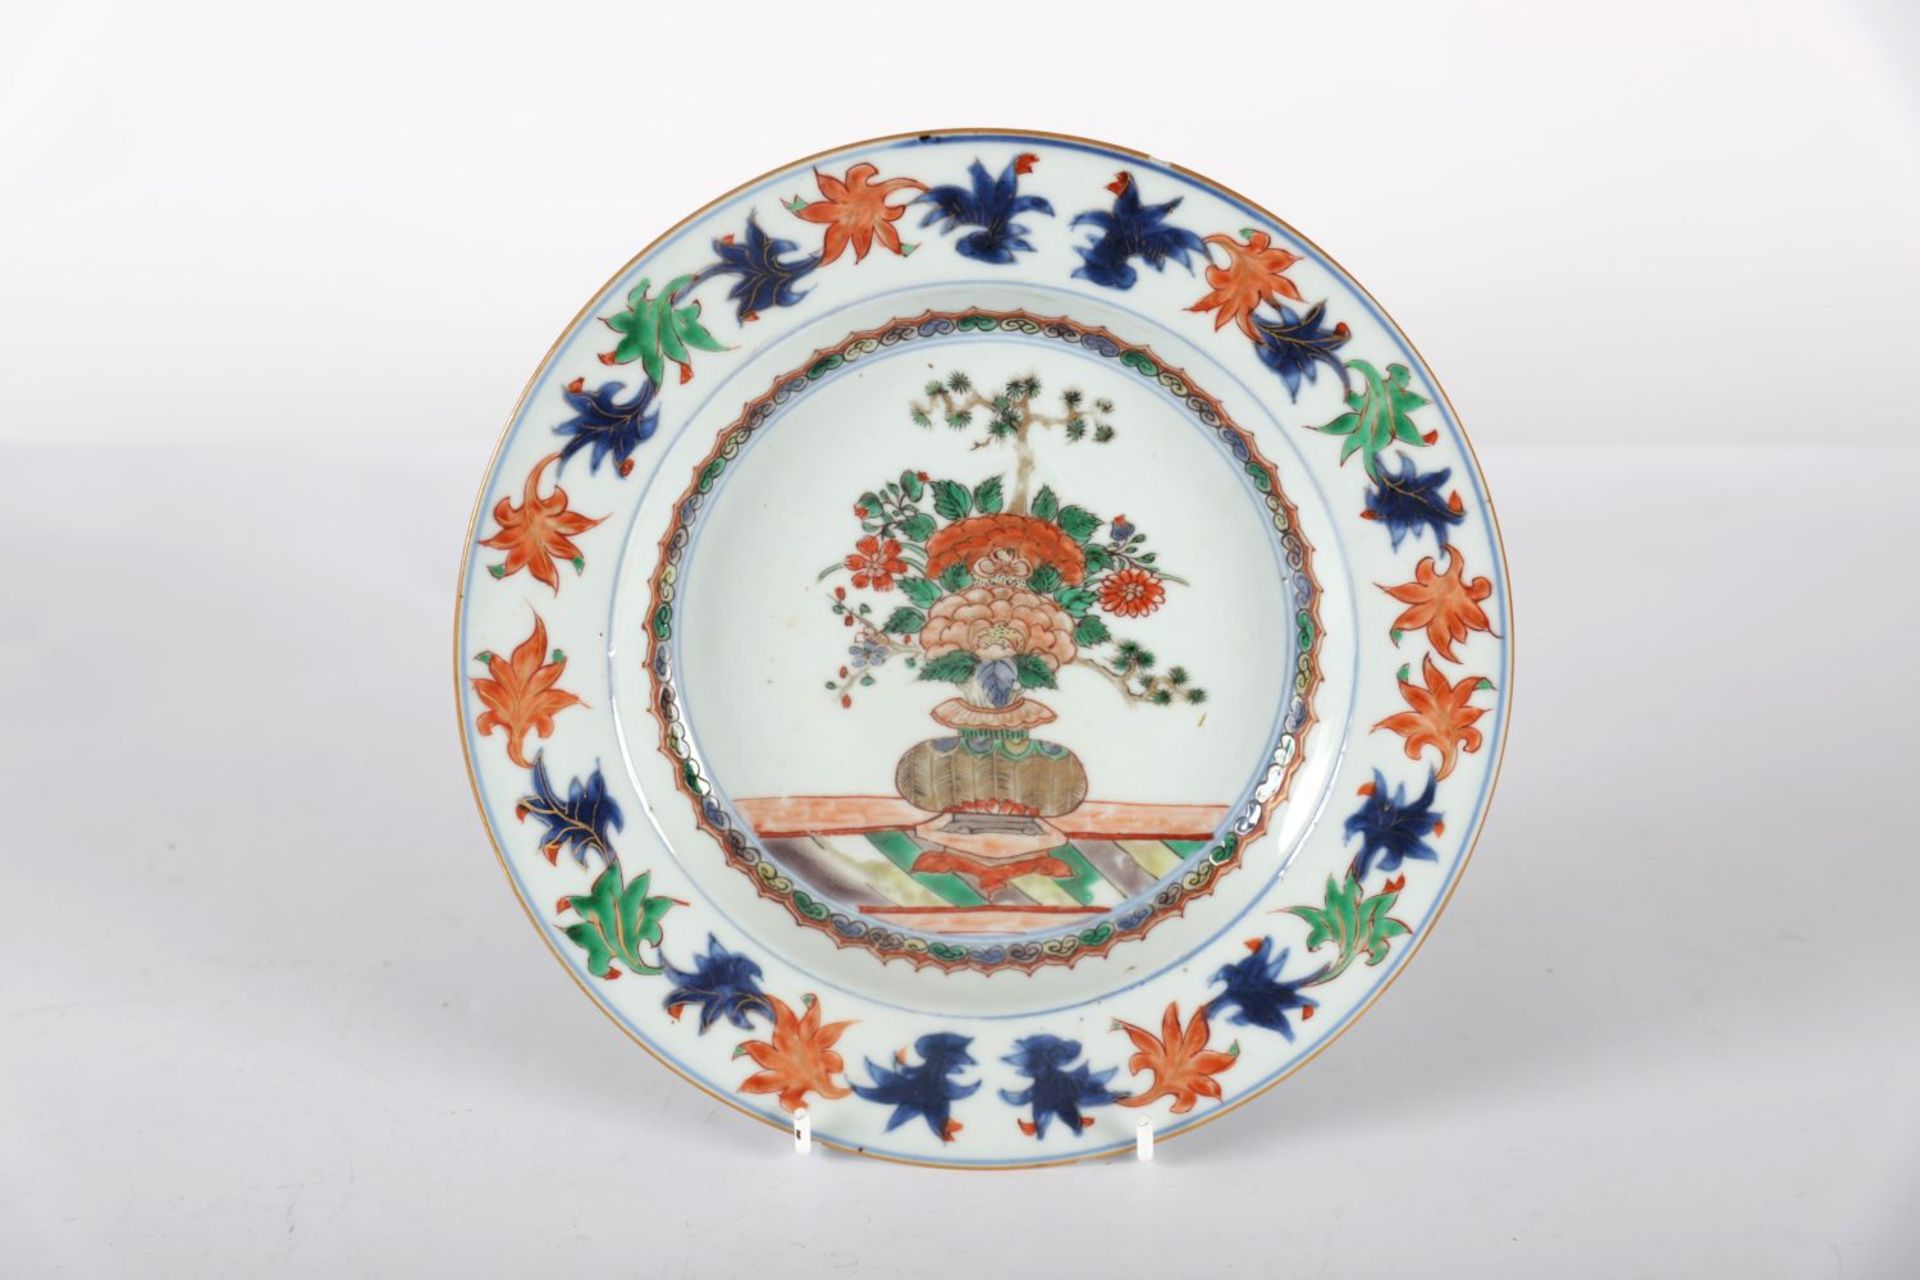 18TH-CENTURY CHINESE FAMILLE ROSE PLATE